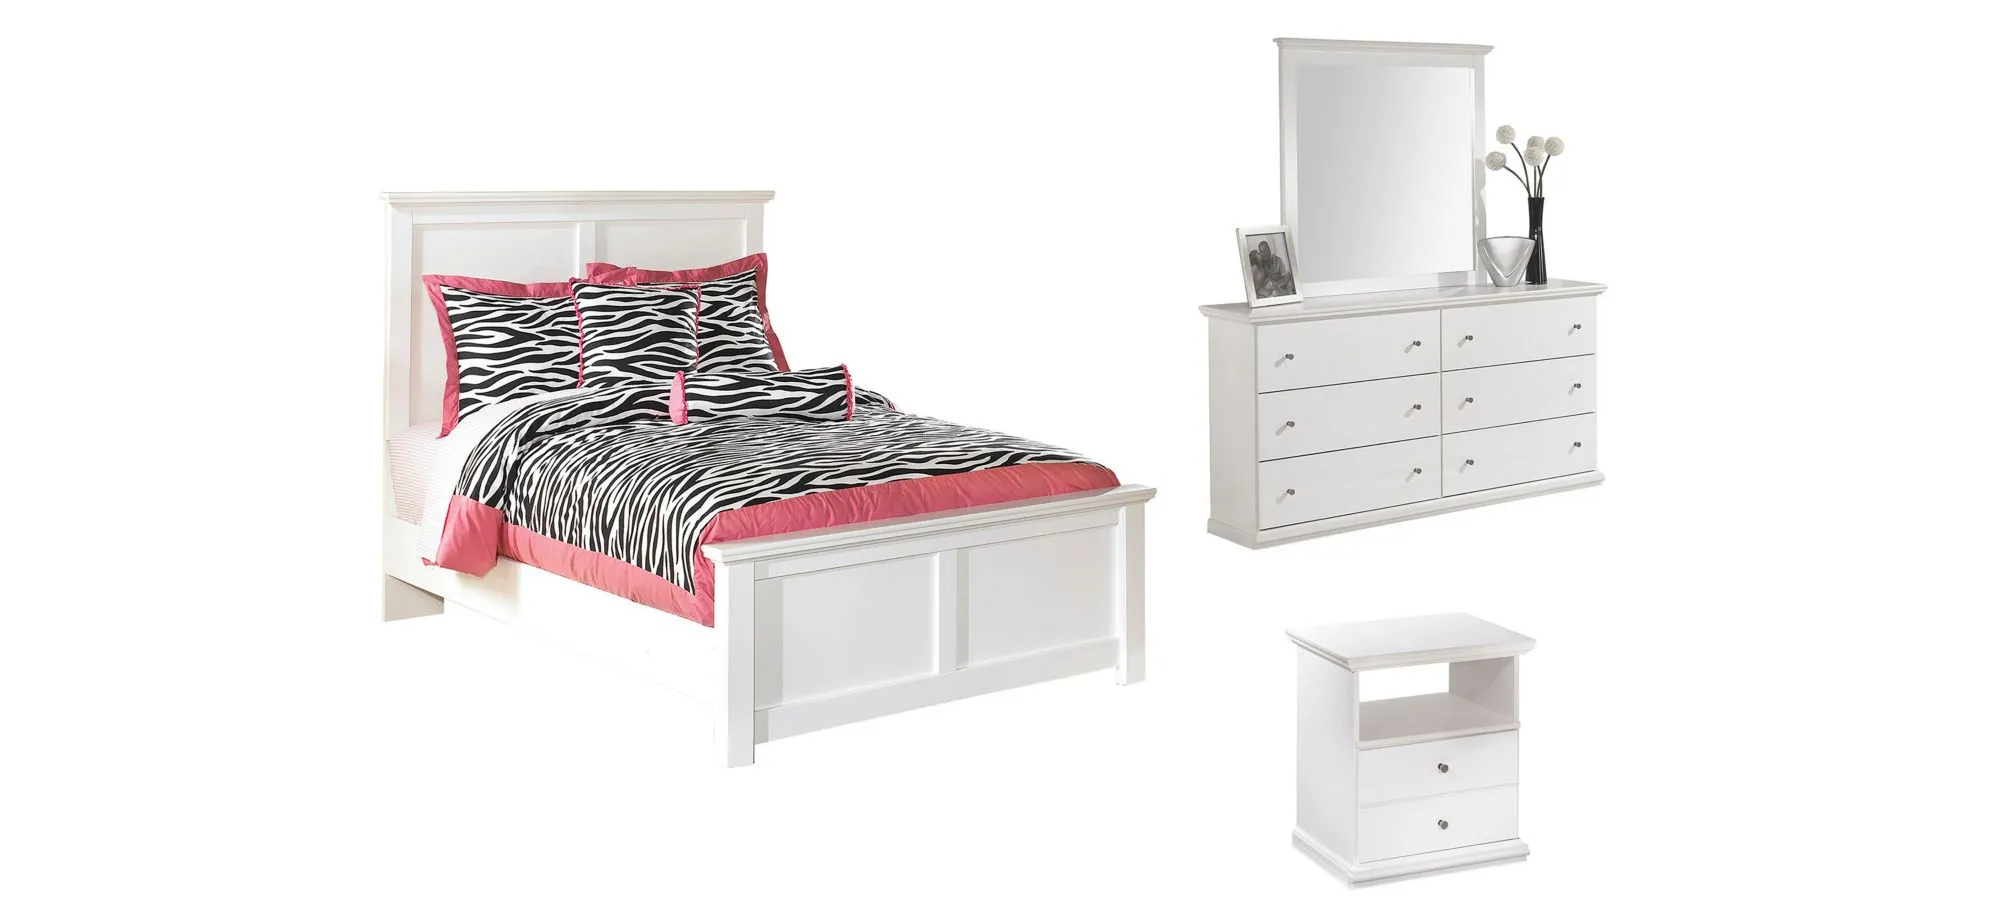 Adele 4-pc. Bedroom Set in White by Ashley Furniture